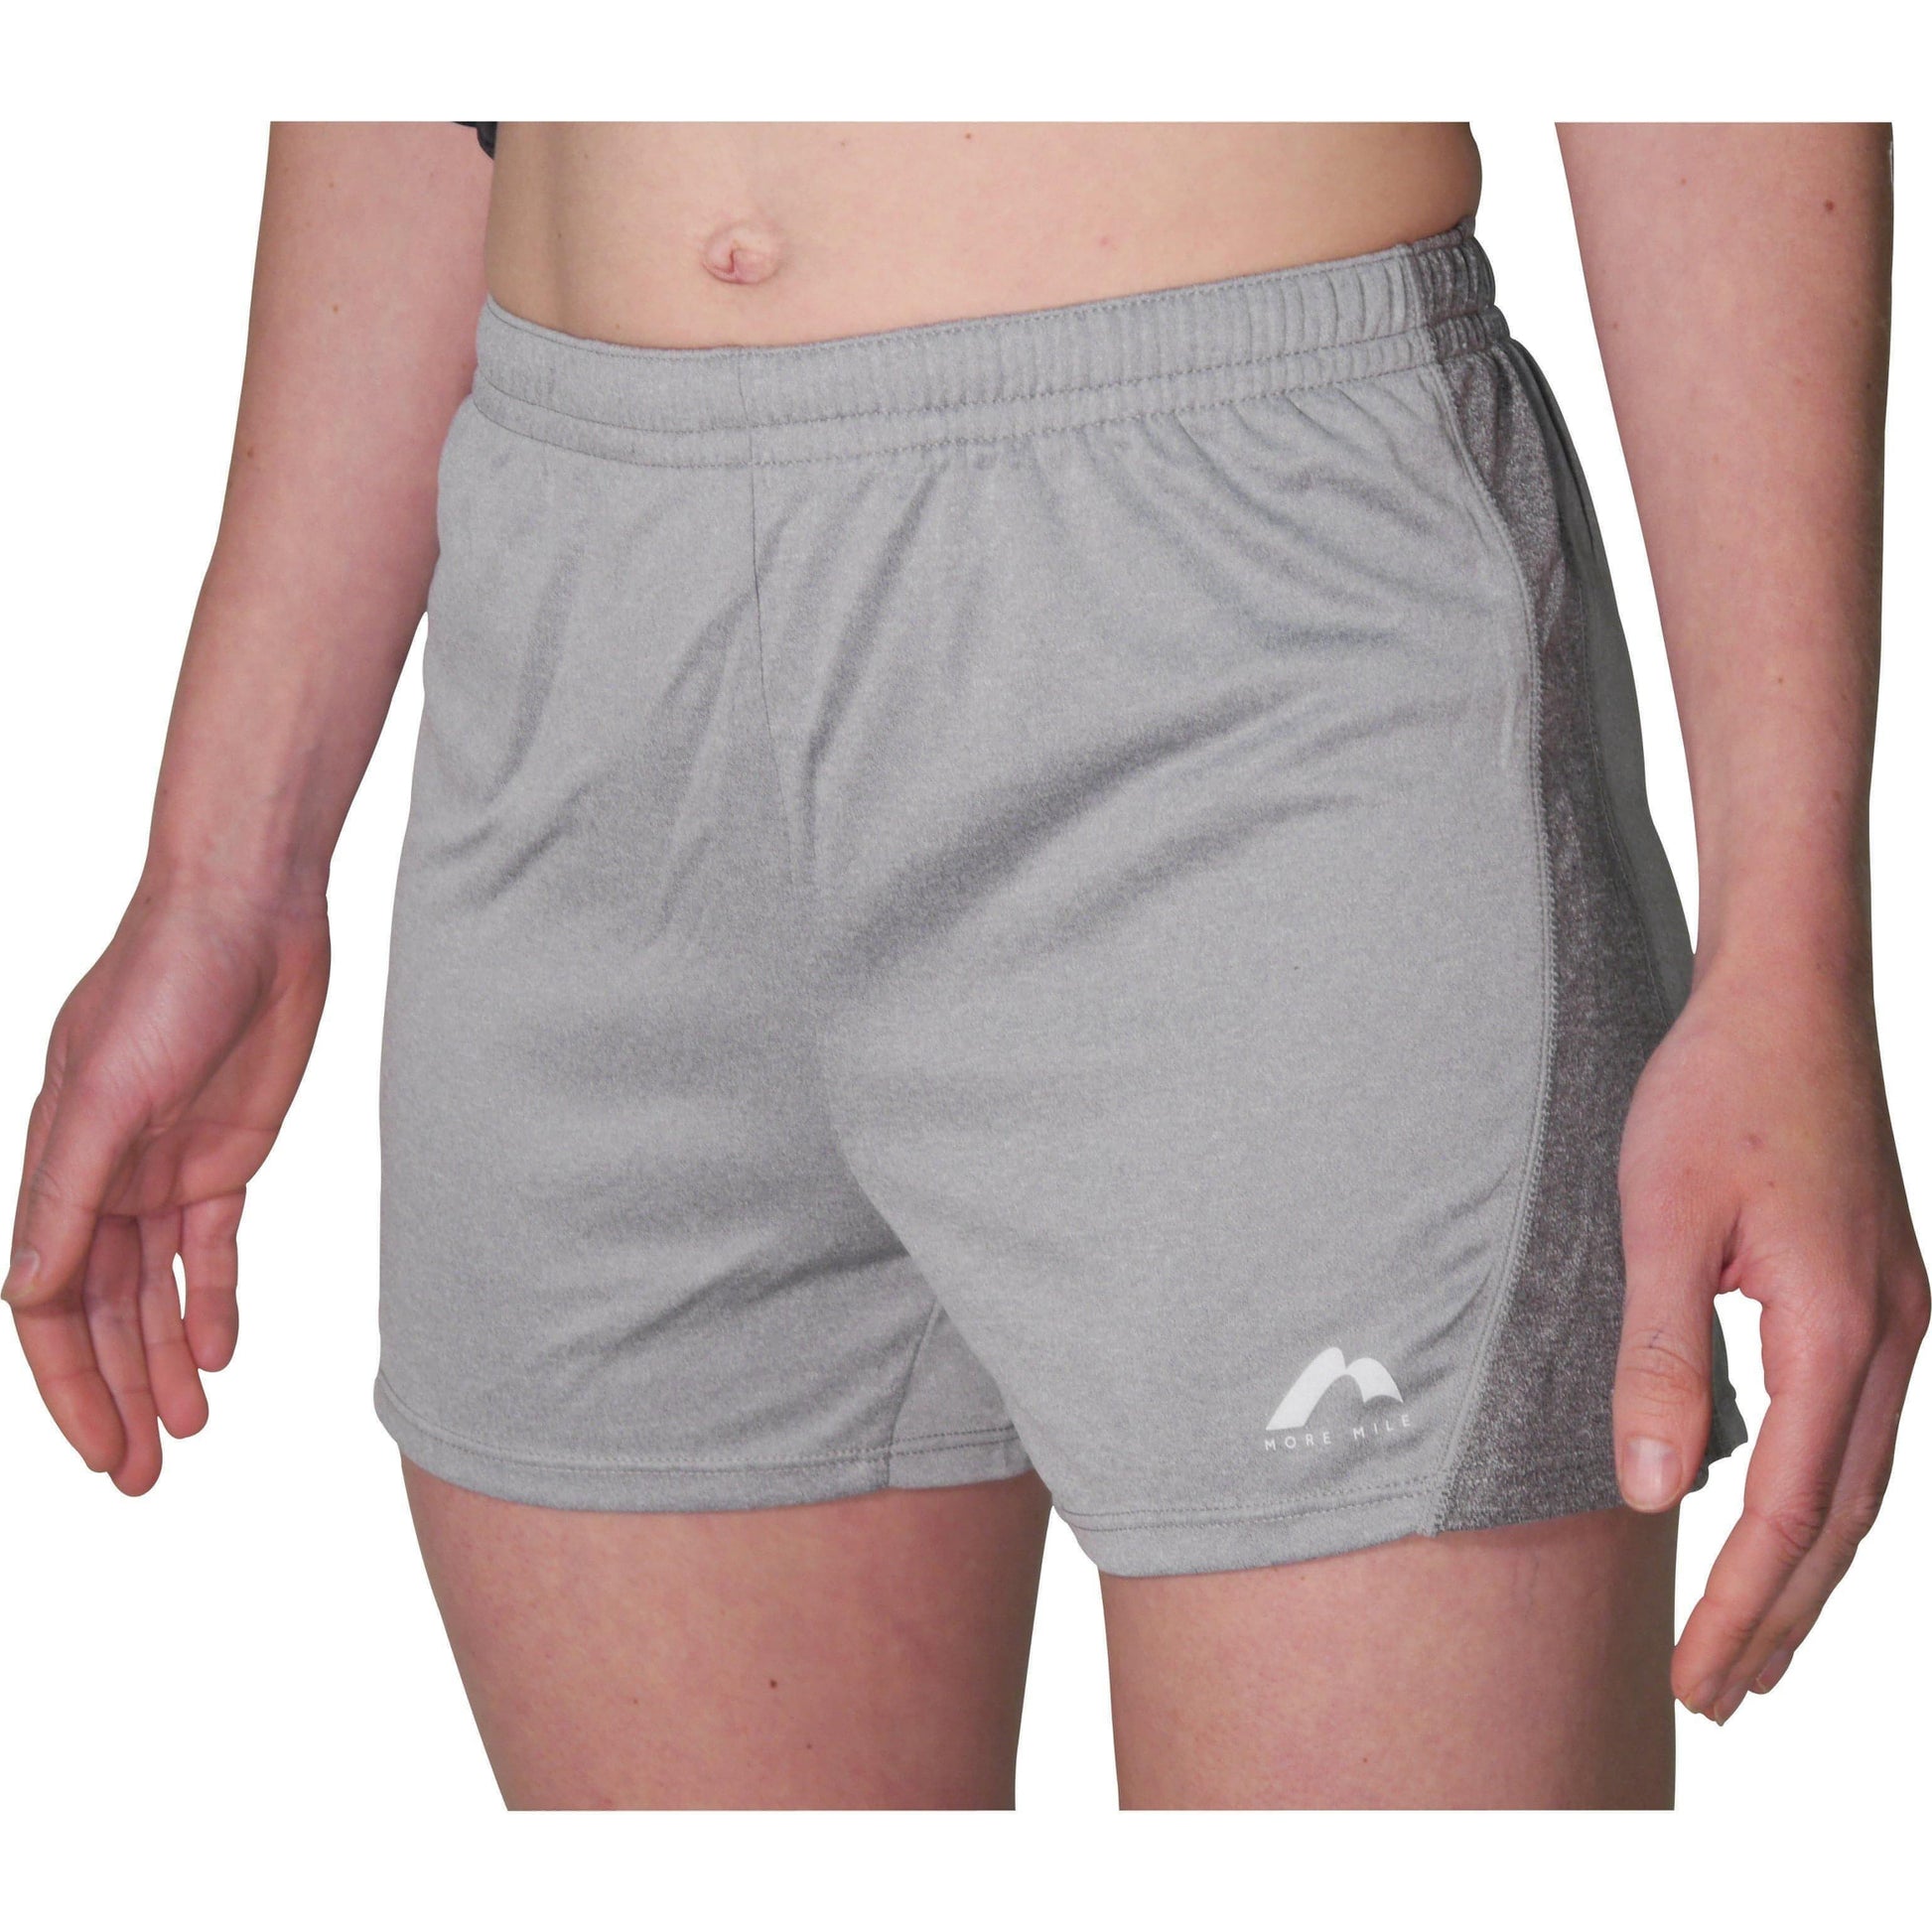 More Mile Marl Jersey Womens Training Shorts - Grey - Start Fitness